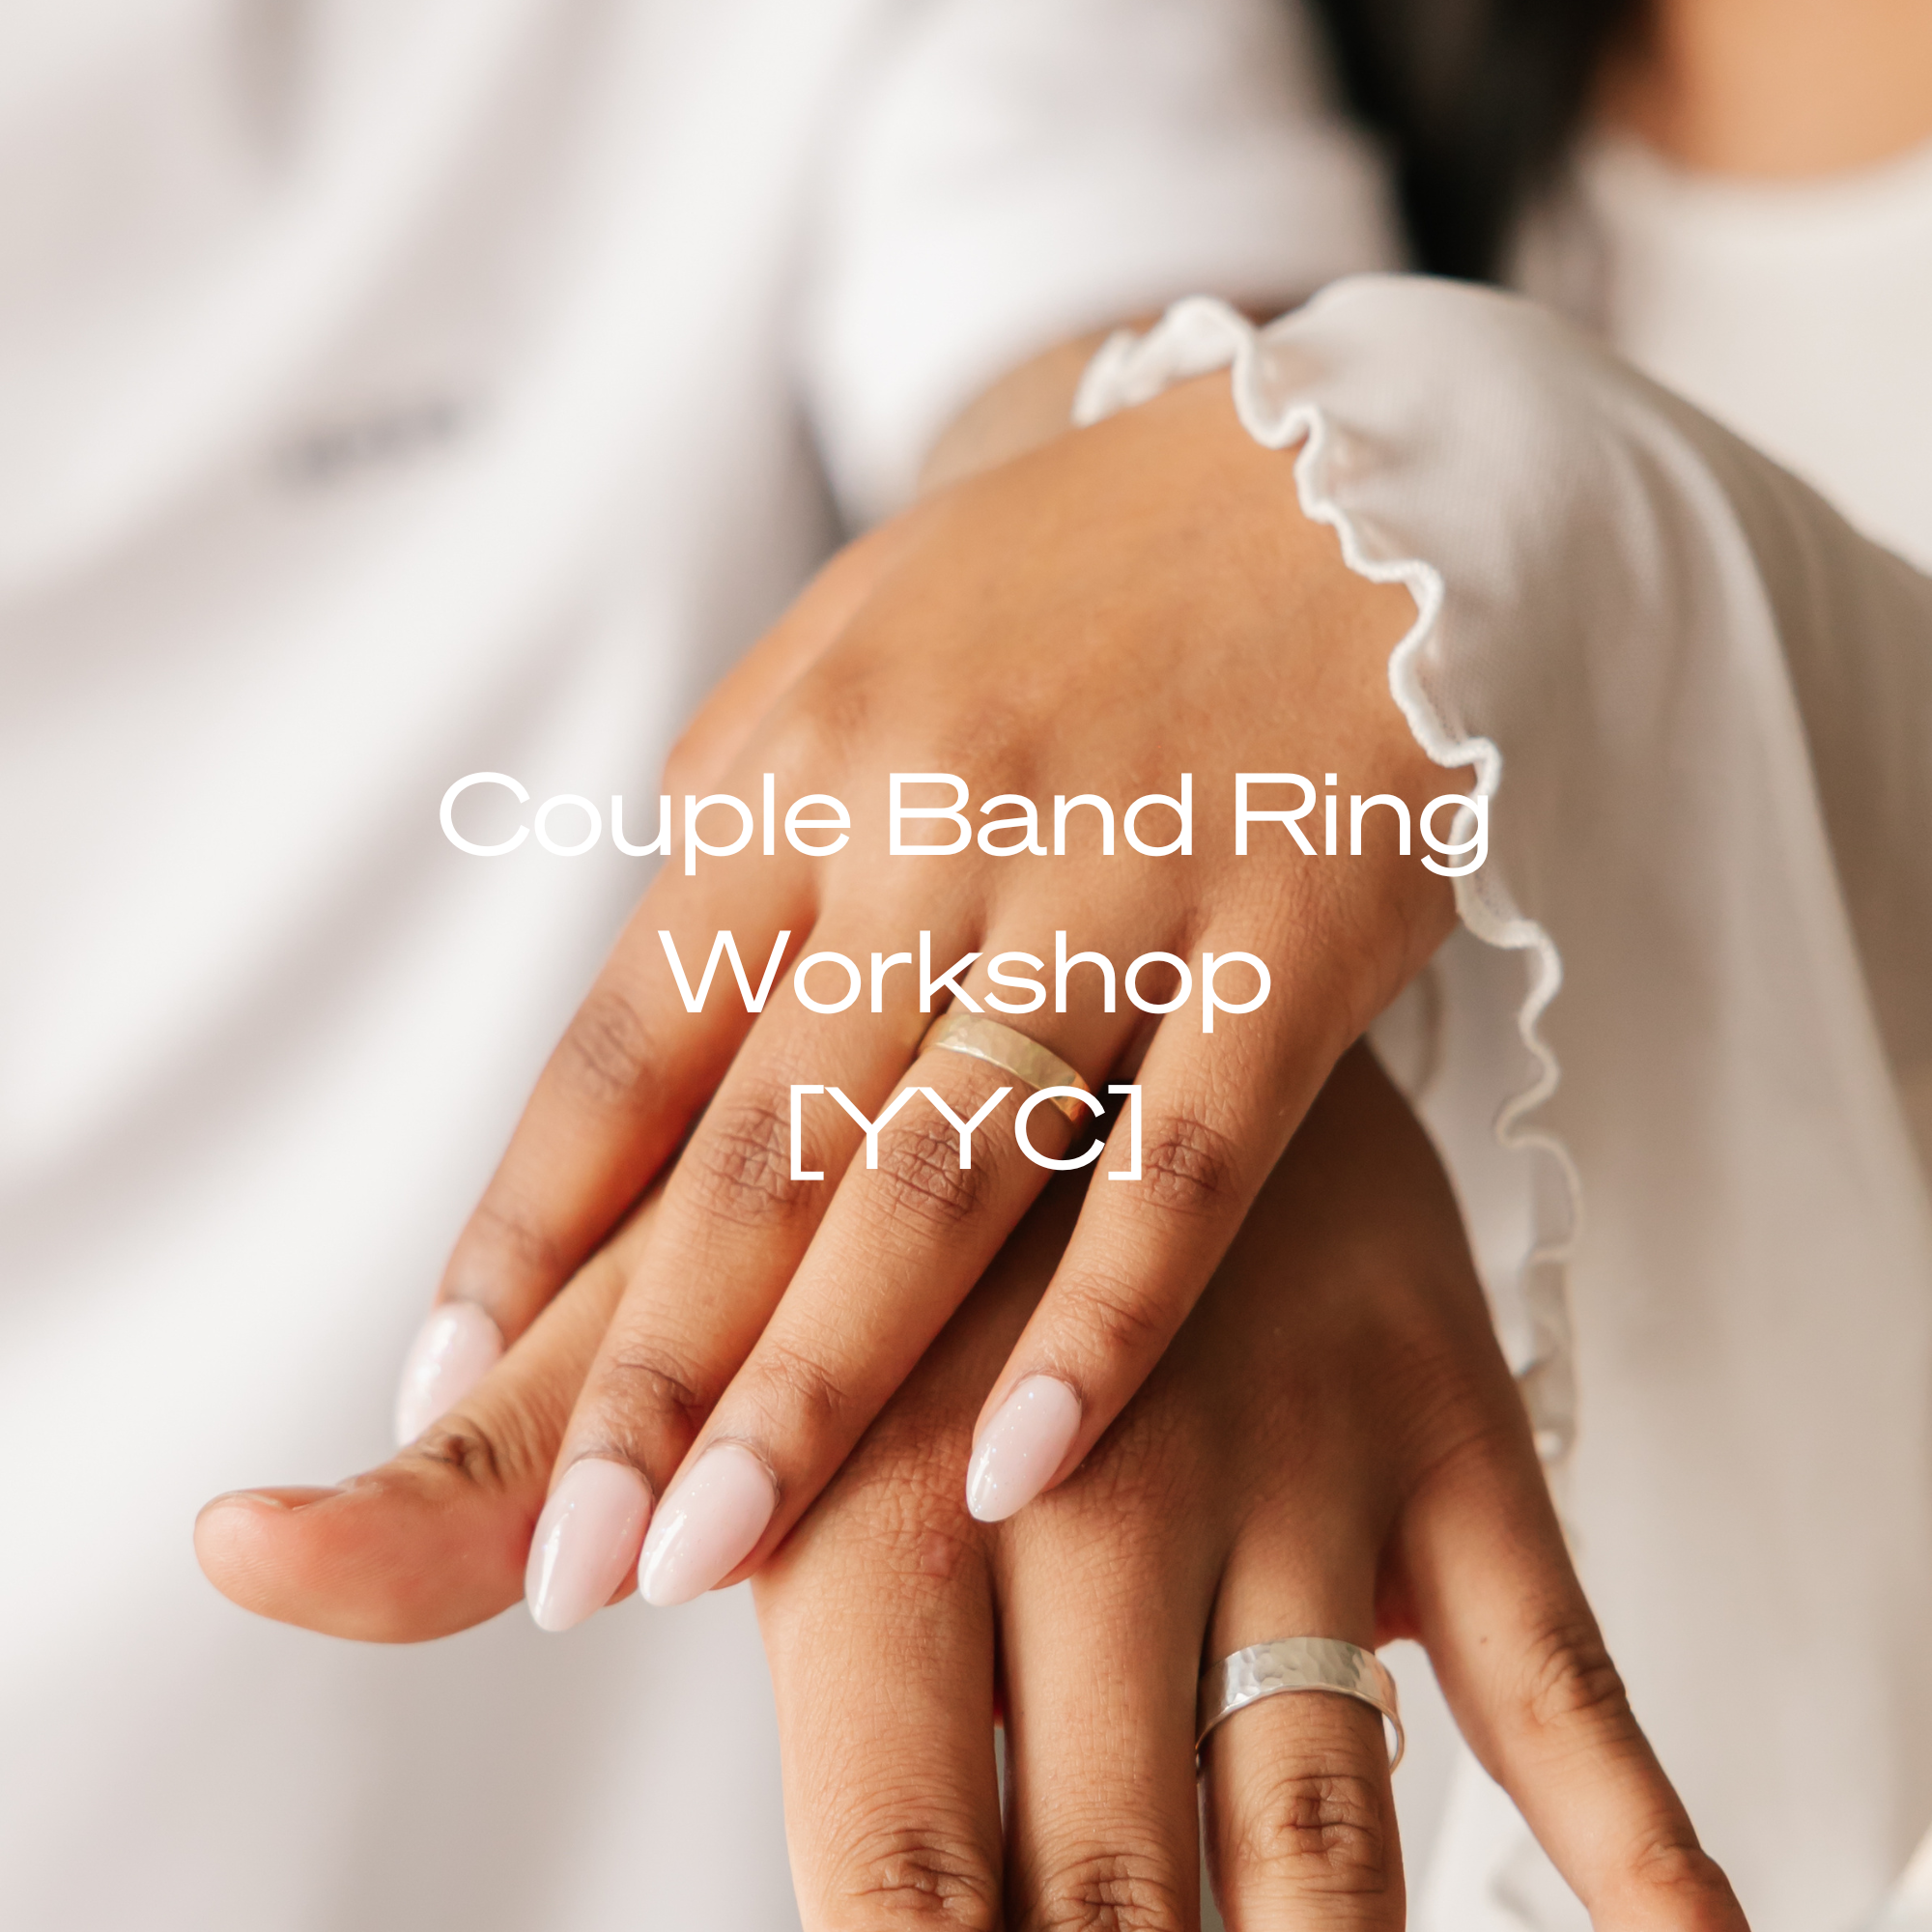 couple band ring making workshop in calgary